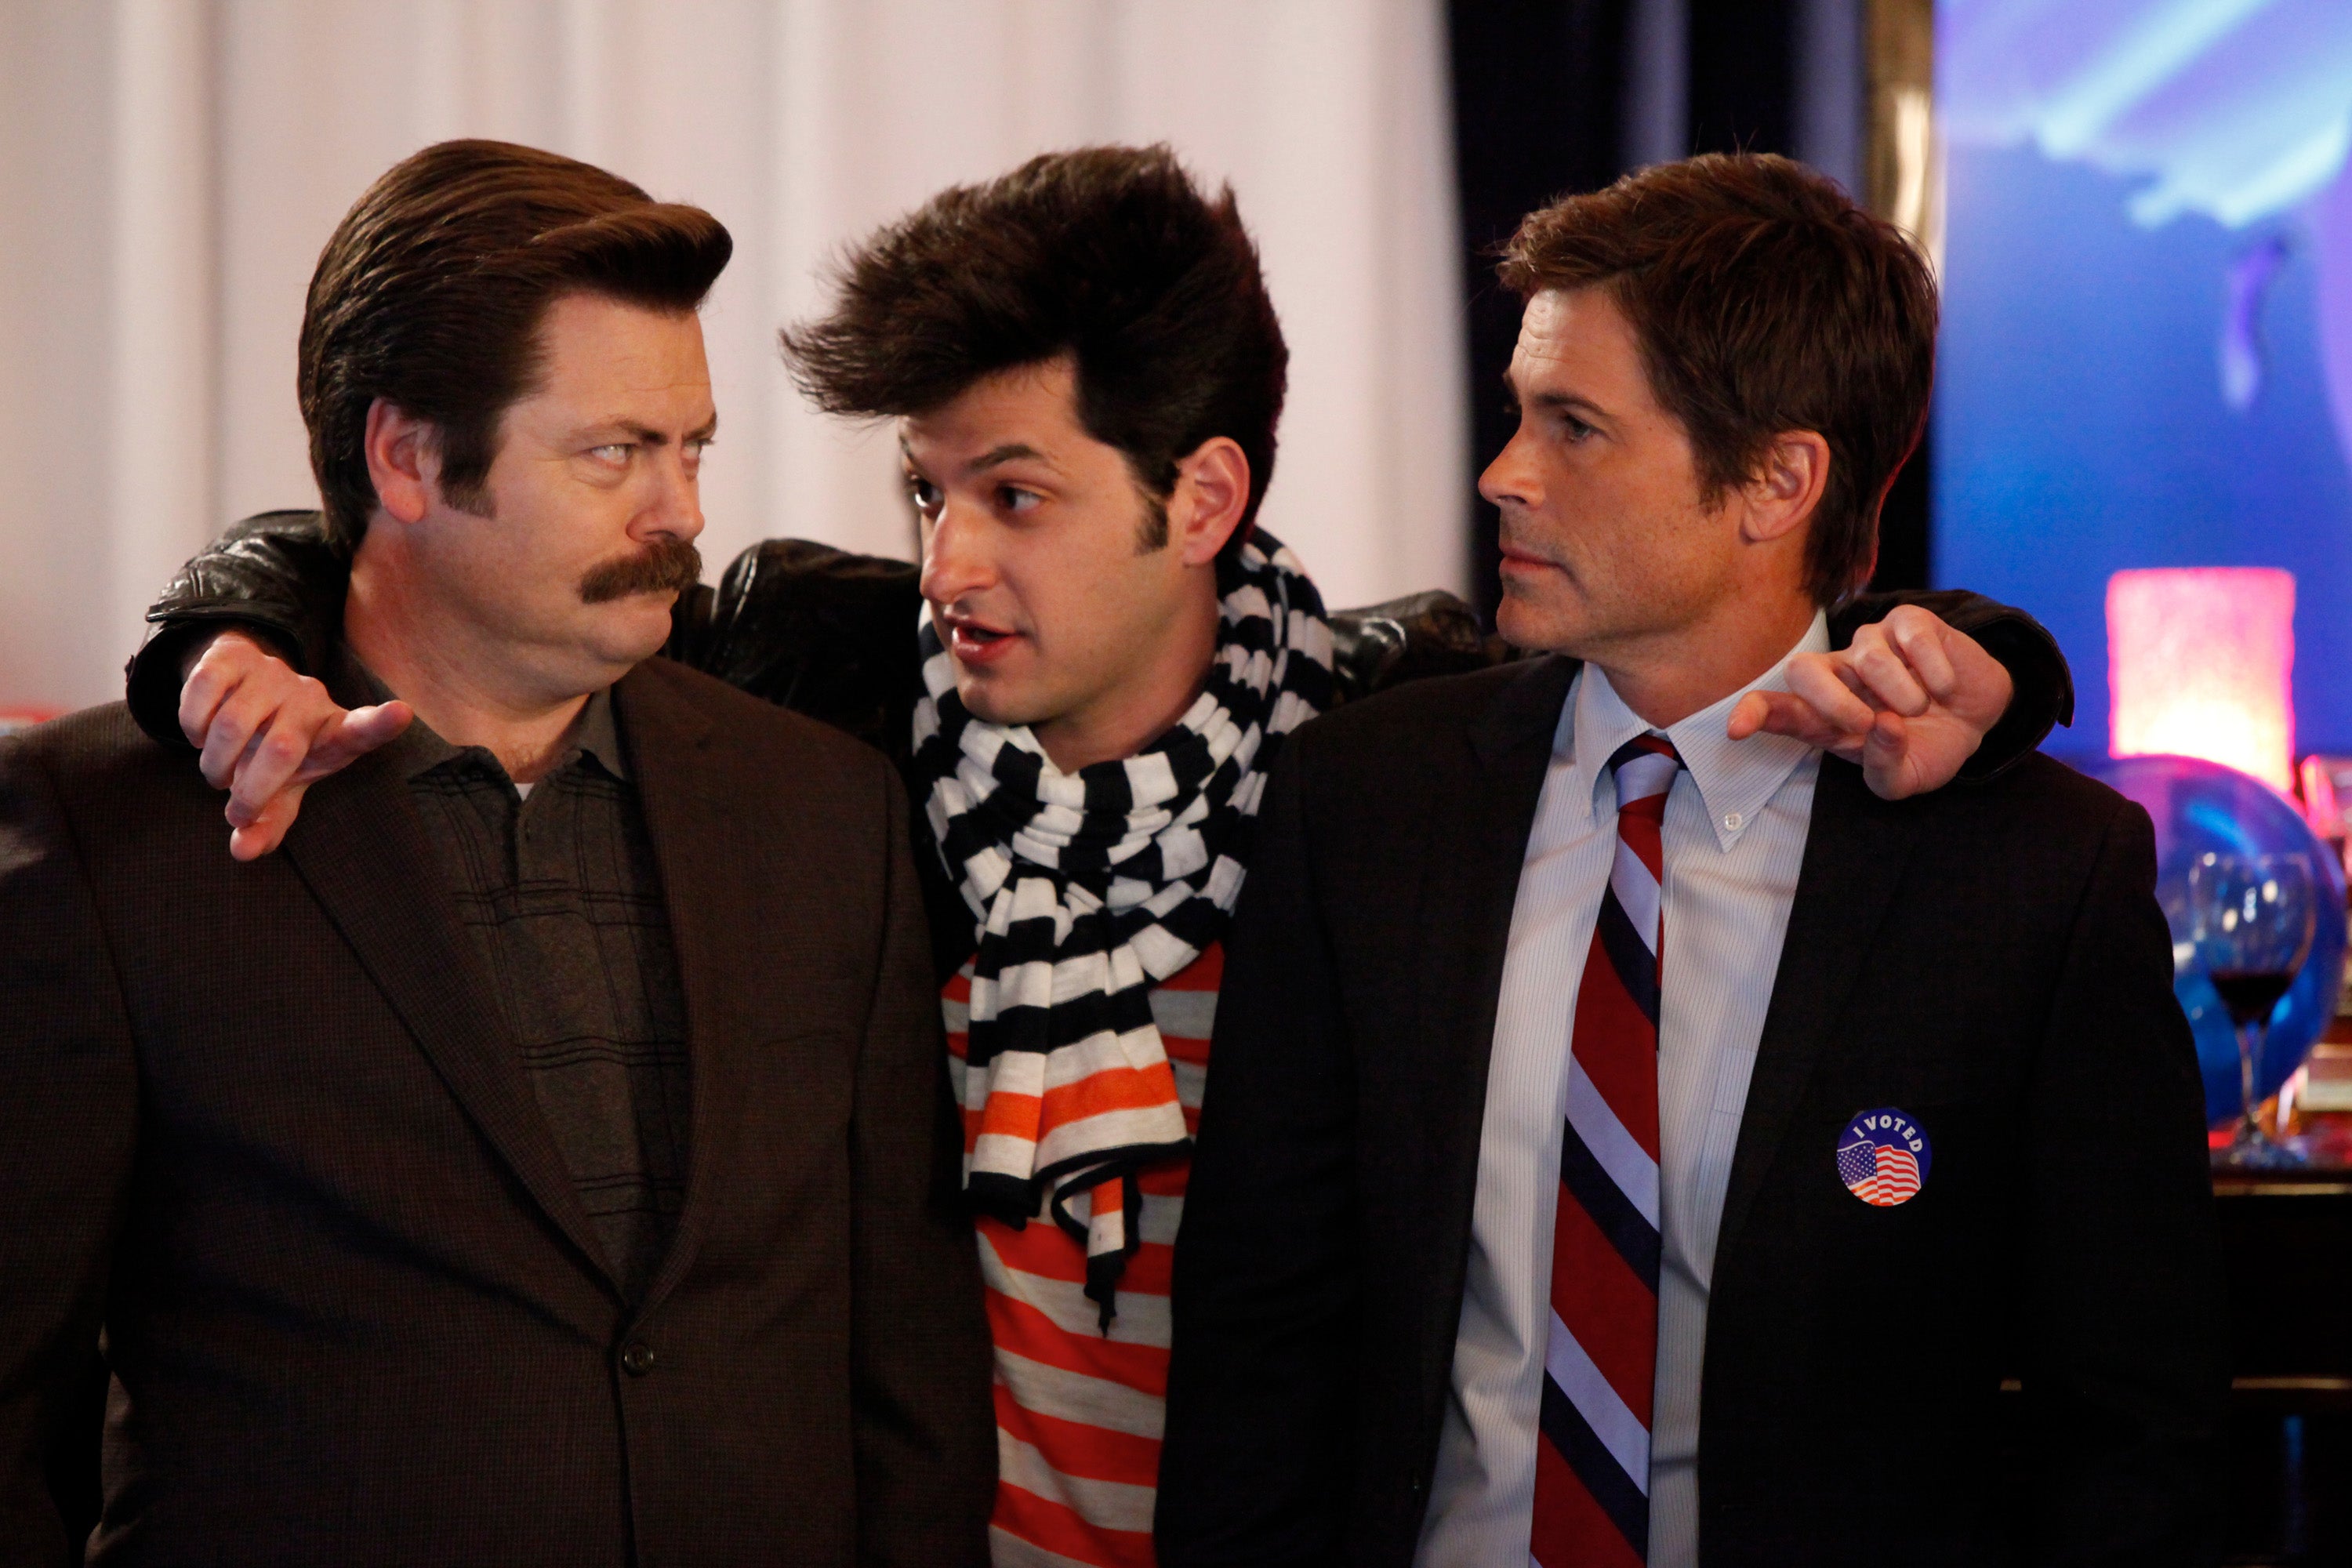 Jean-Ralphio (Schwartz), in between Nick Offerman and Rob Lowe in ‘Parks and Recreation'